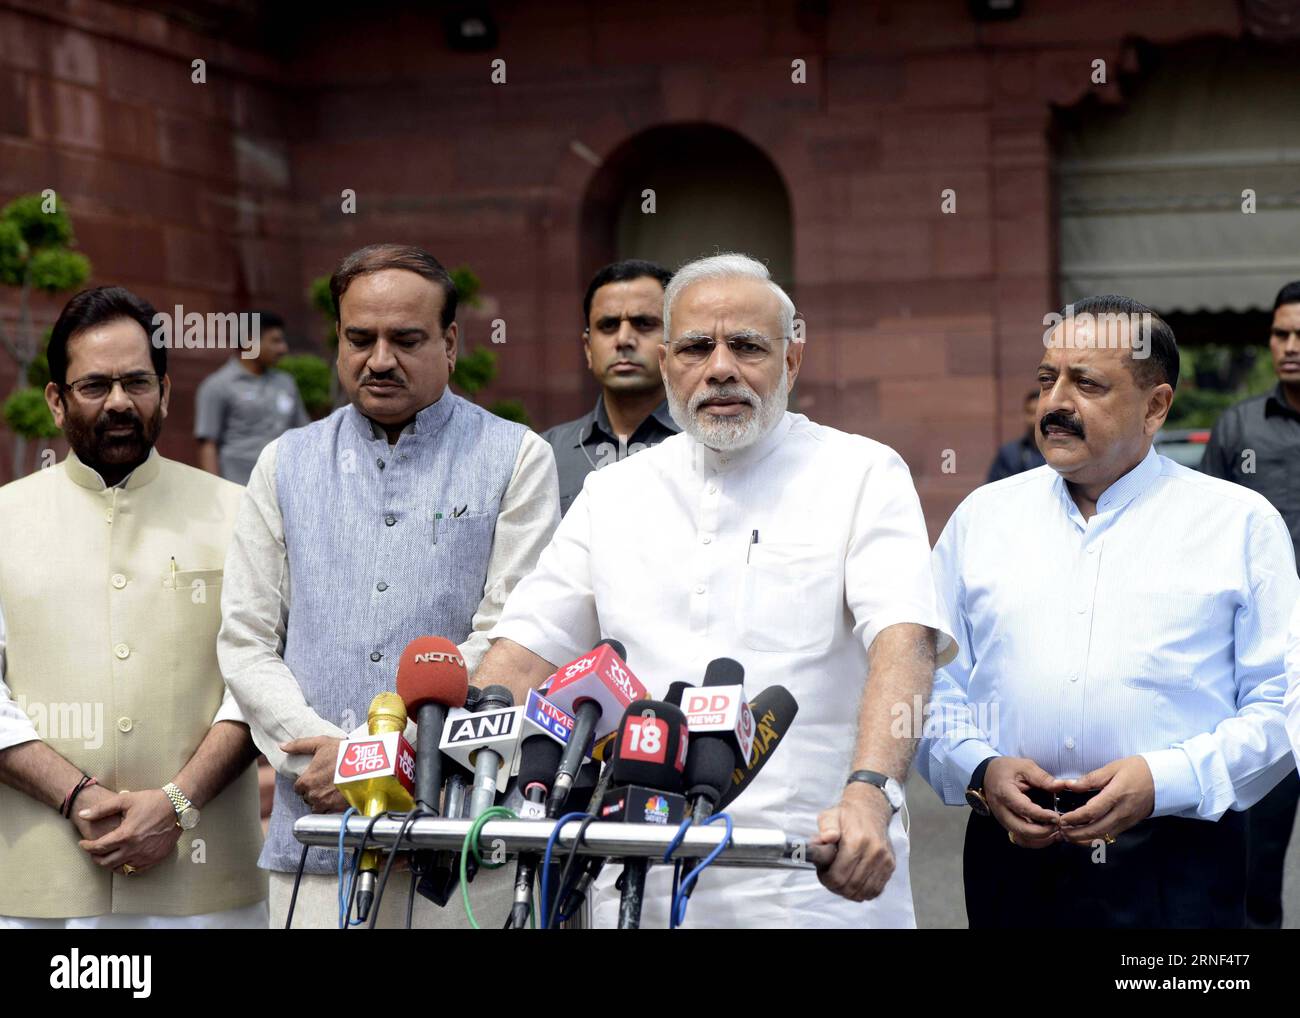 (160718) -- NEW DELHI, July 18, 2016 -- Indian Prime Minister Narendra Modi (2nd R, front) addresses the media at Parliament House upon arrival on the first day of monsoon session in New Delhi, India, July 18, 2016. The monsoon session of Indian lower house began on Monday but was adjourned shortly toTuesday due to the death of Madhya Pradesh MP Dalpat Singh Paraste. ) (sxk) INDIA-NEW DELHI-MONSOON SESSION-PM-MODI Stringer PUBLICATIONxNOTxINxCHN   160718 New Delhi July 18 2016 Indian Prime Ministers Narendra Modes 2nd r Front addresses The Media AT Parliament House UPON Arrival ON The First Da Stock Photo